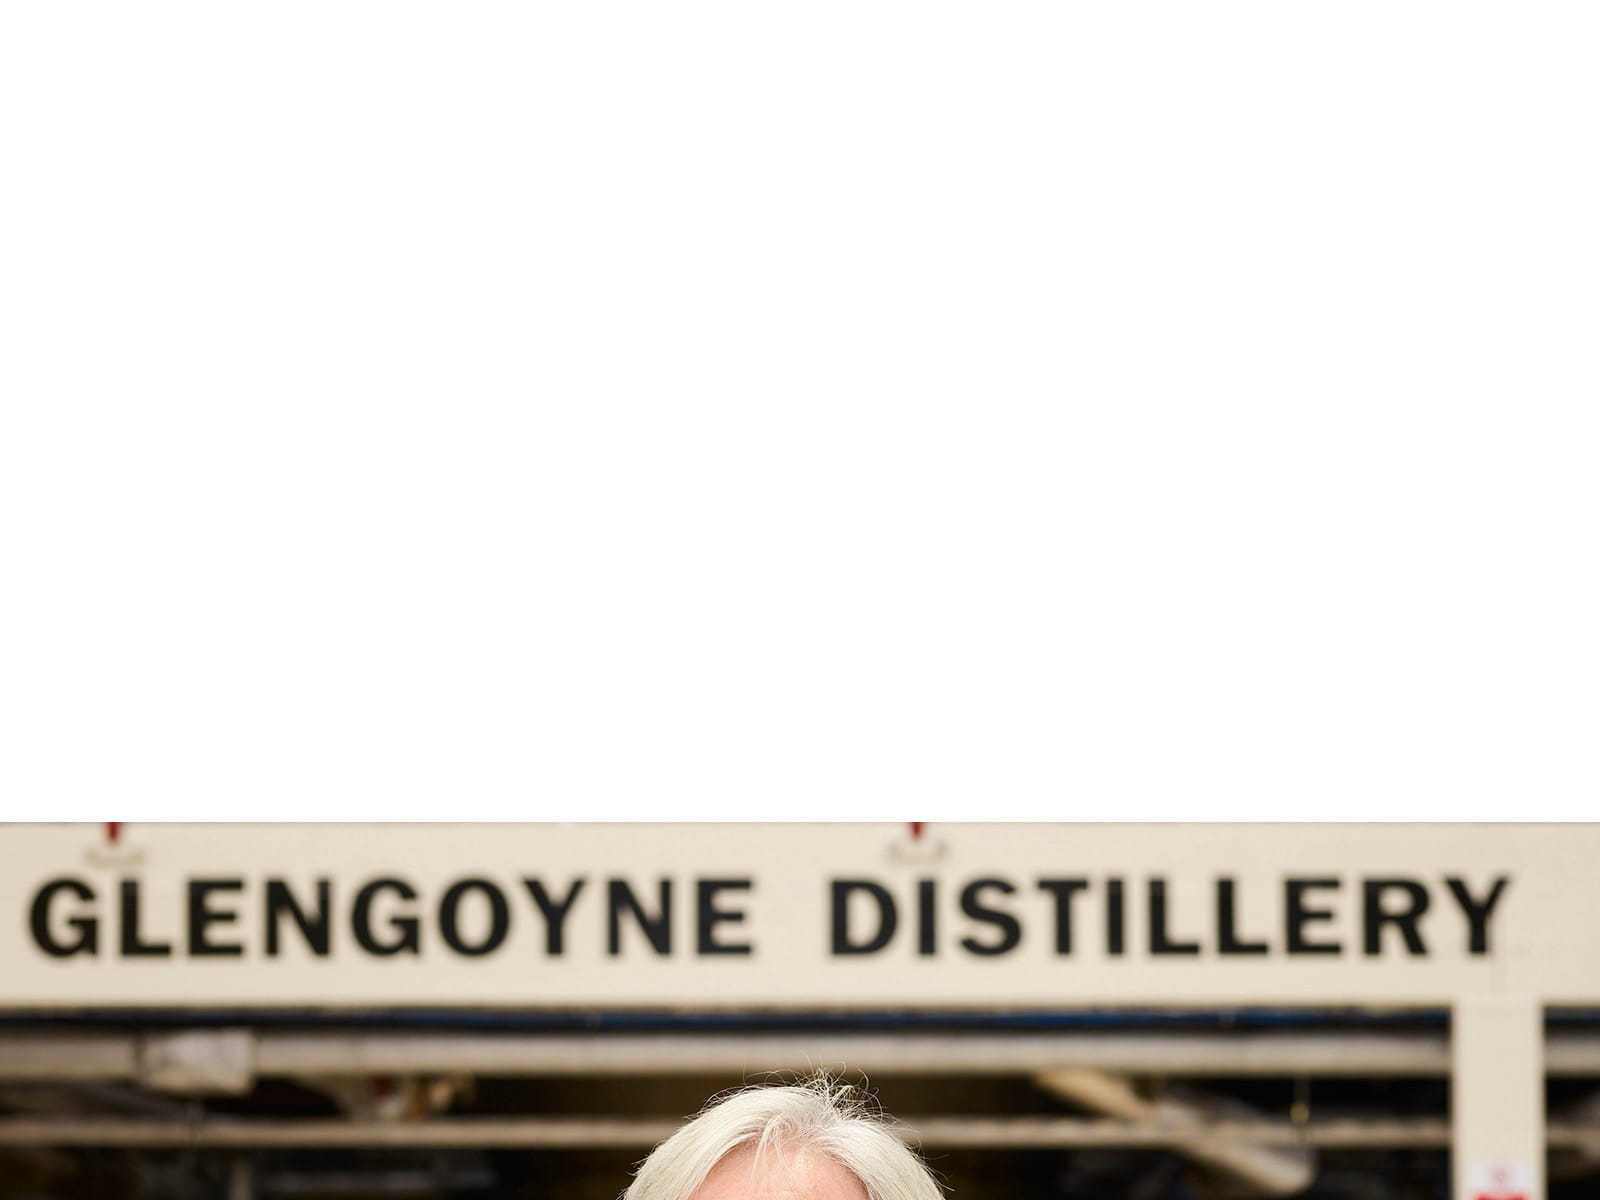 Mike Younger, Financial Director and ICAEW member Ian Macleod Distillers